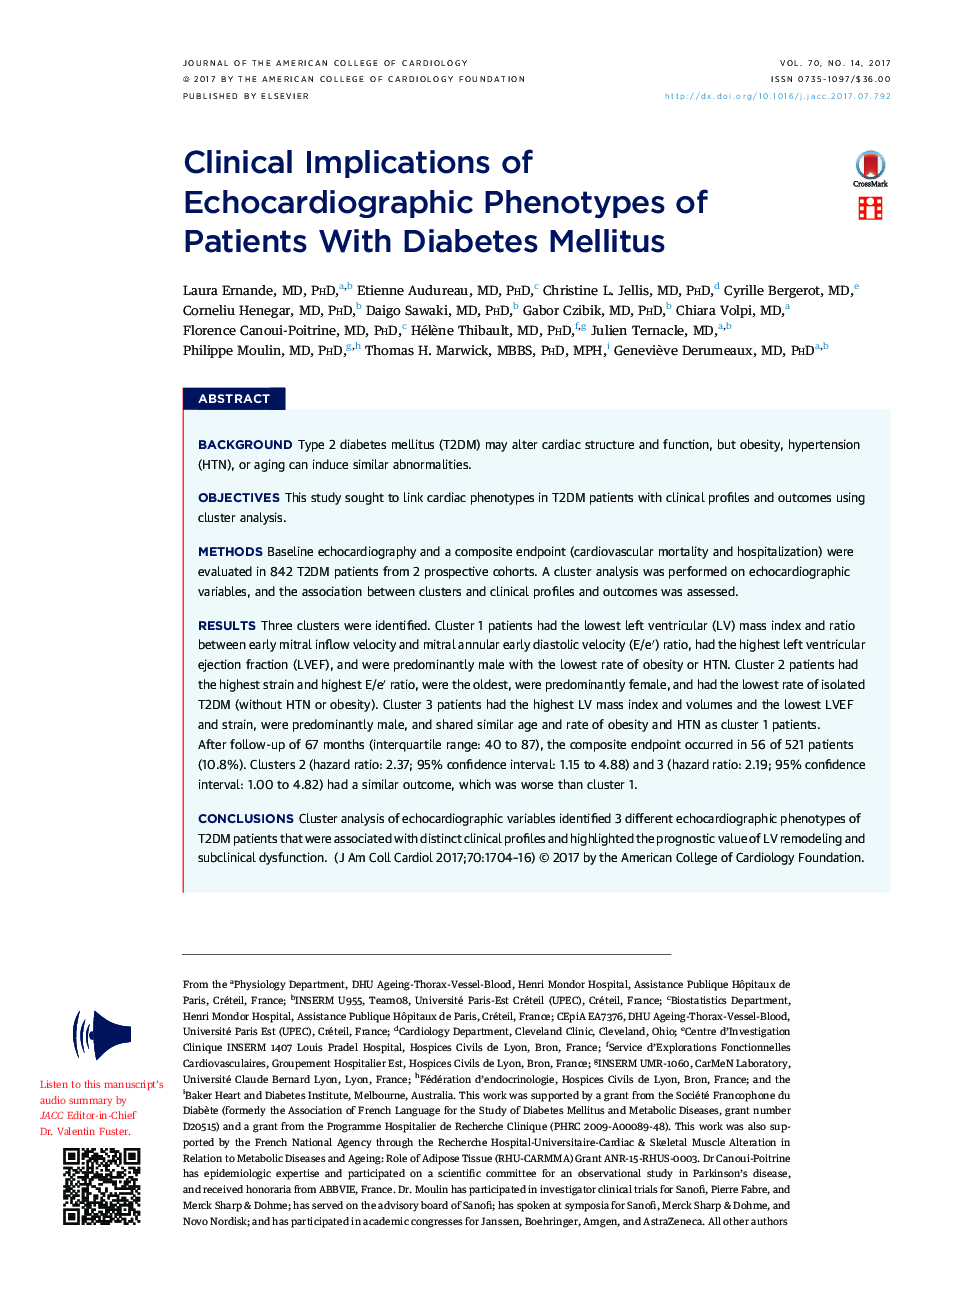 Clinical Implications of EchocardiographicÂ Phenotypes of PatientsÂ With Diabetes Mellitus